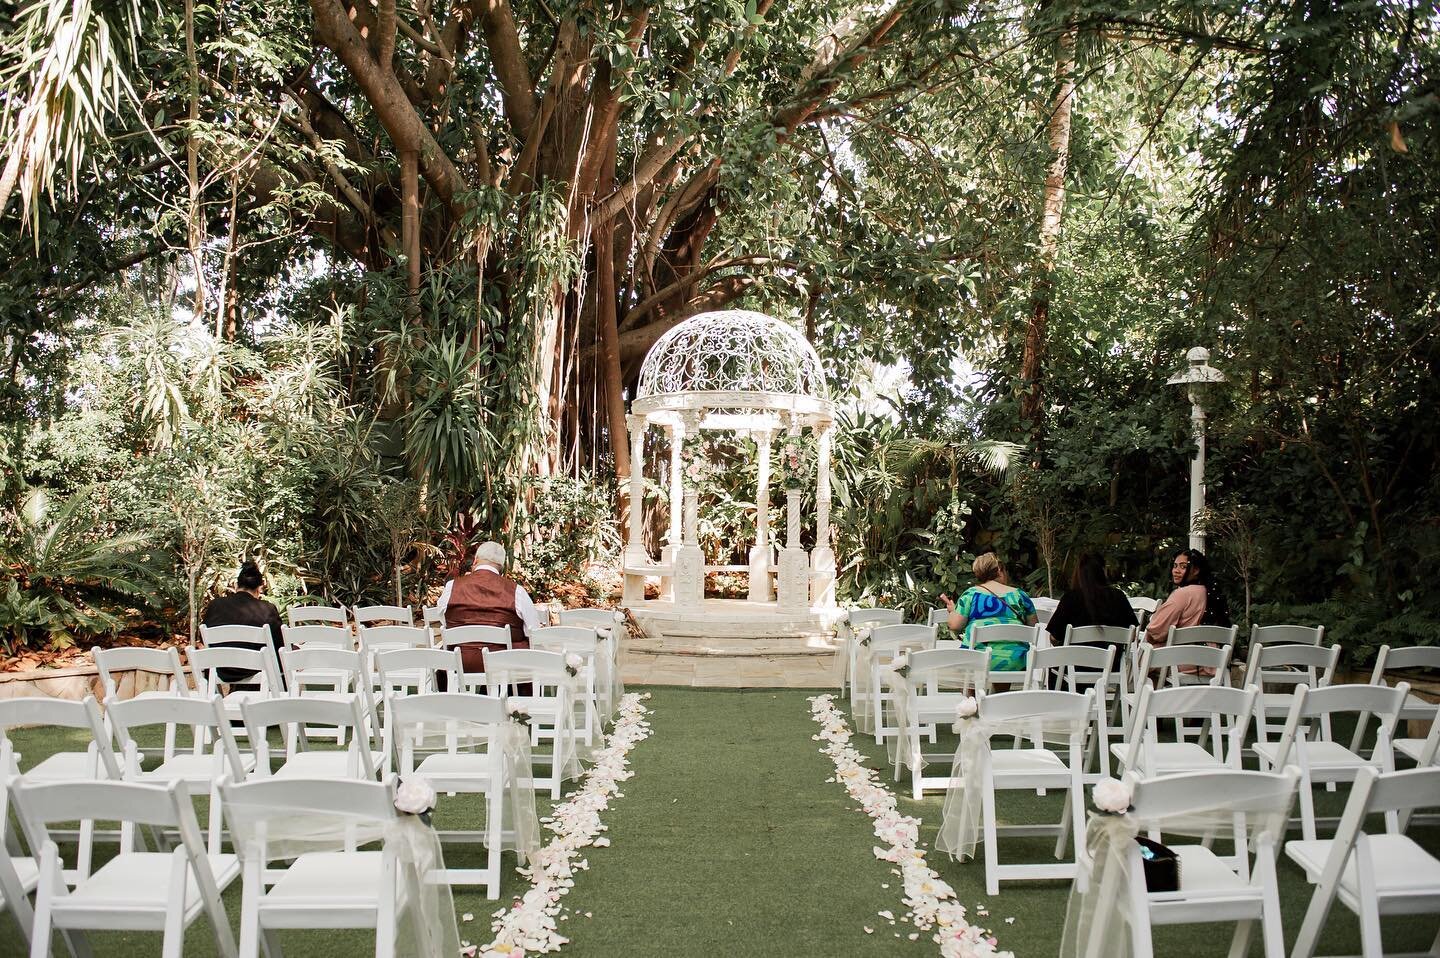 How stunning does our ceremony garden look 😍

Captured by one of our amazing pop up wedding photographers Yena from @sugarblushphoto 🌸
.
.
.
#brisbaneweddings #brisbaneweddingvenue #brisbaneweddingplanning #brisbanevenues #brisbanegardenvenue #gard